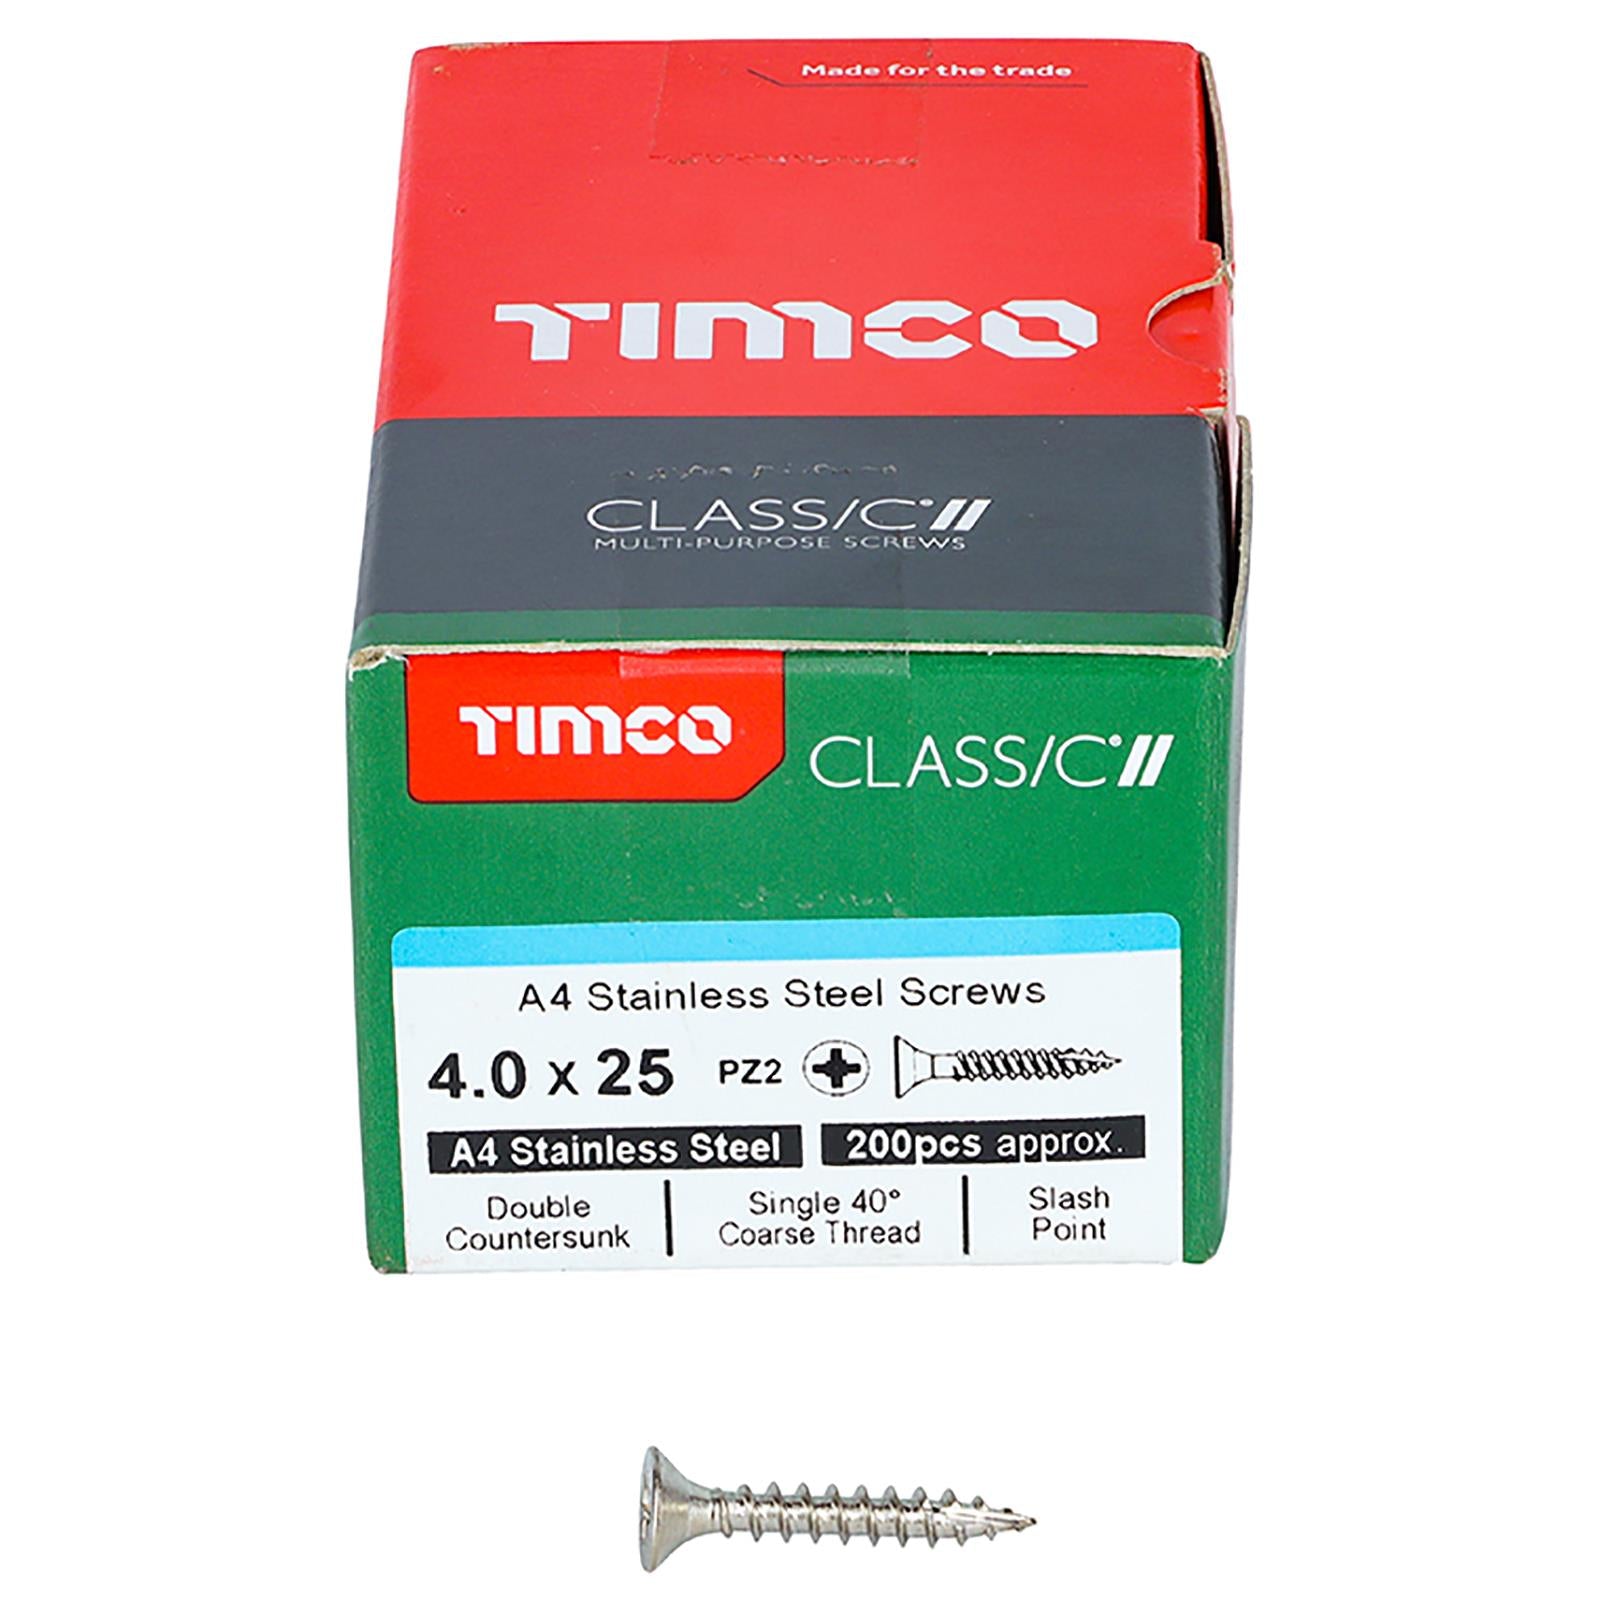 TIMCO Classic Wood Screw A4 Stainless Steel Countersunk Multi Purpose